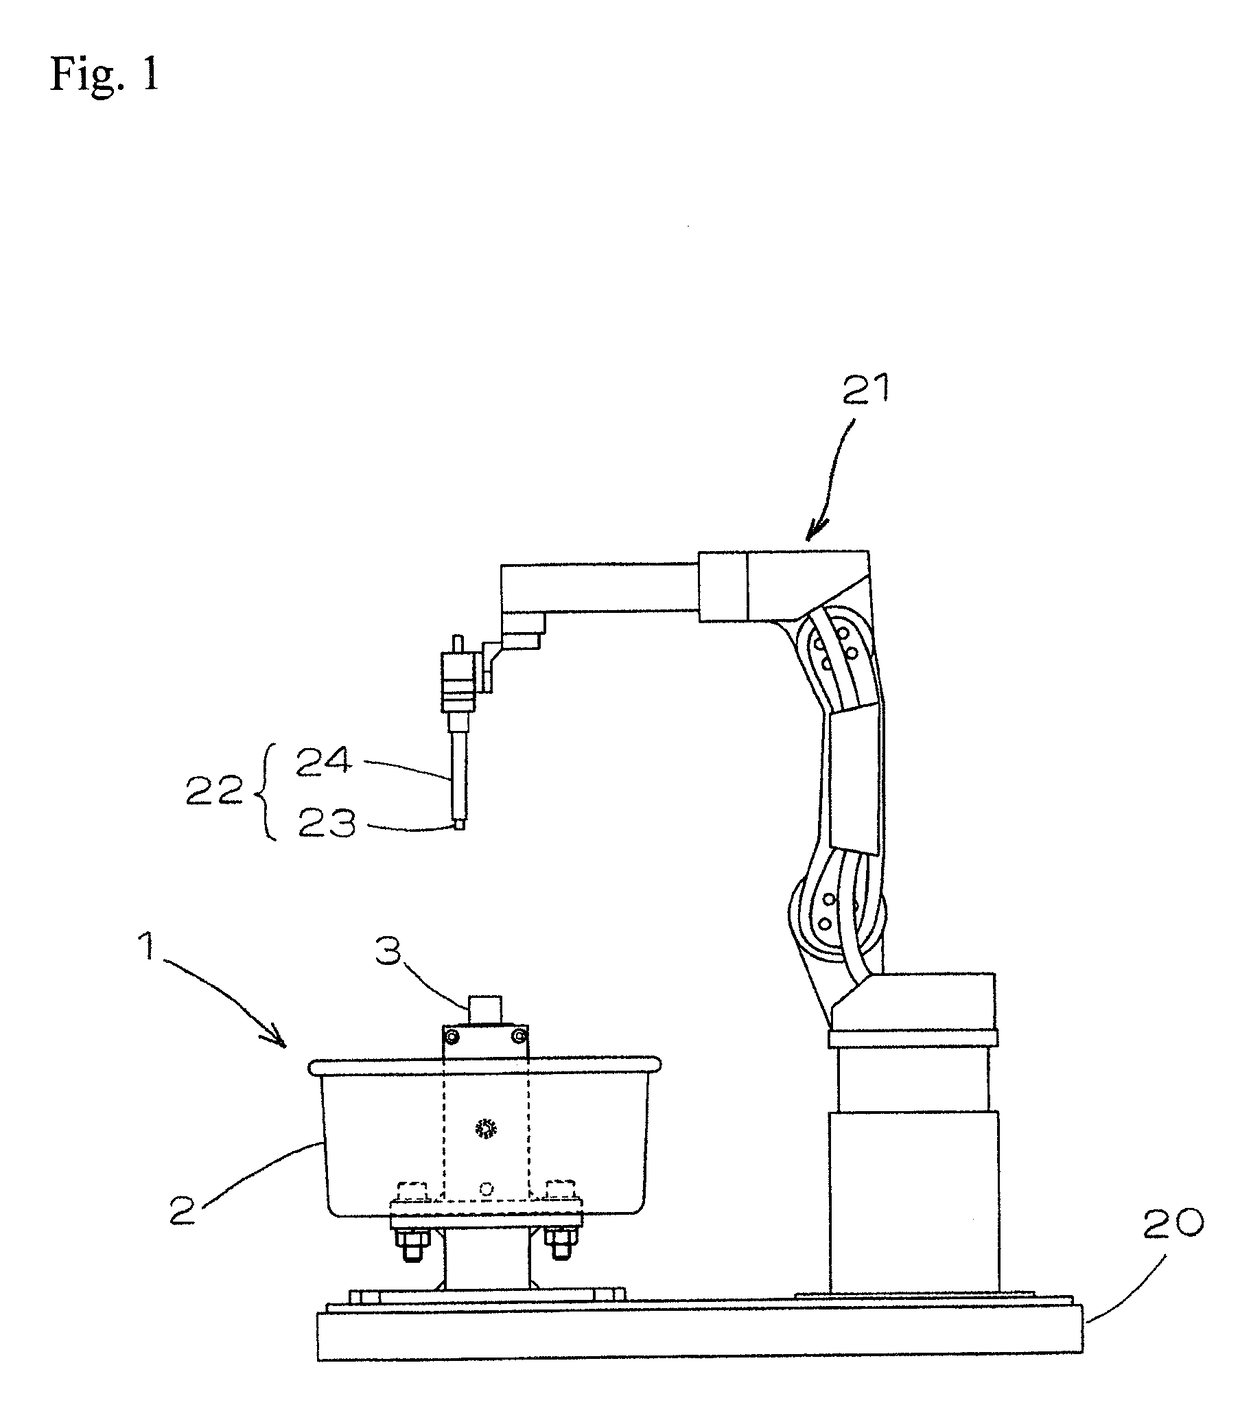 Nozzle cleaner device